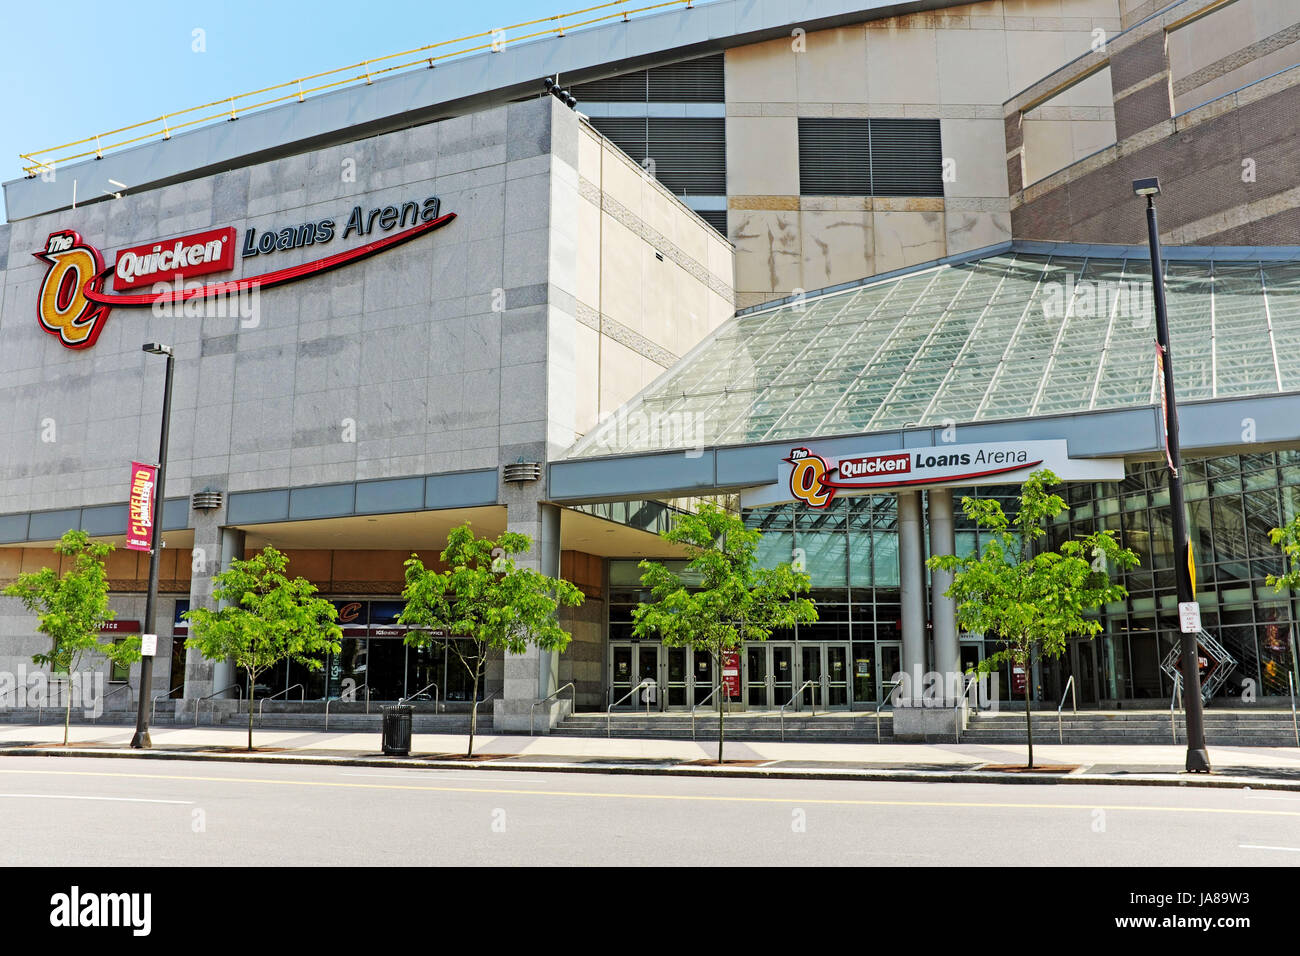 Quicken Loans Arena, home of the Cleveland Cavaliers, plays host to the 2017 NBA Finals Stock Photo